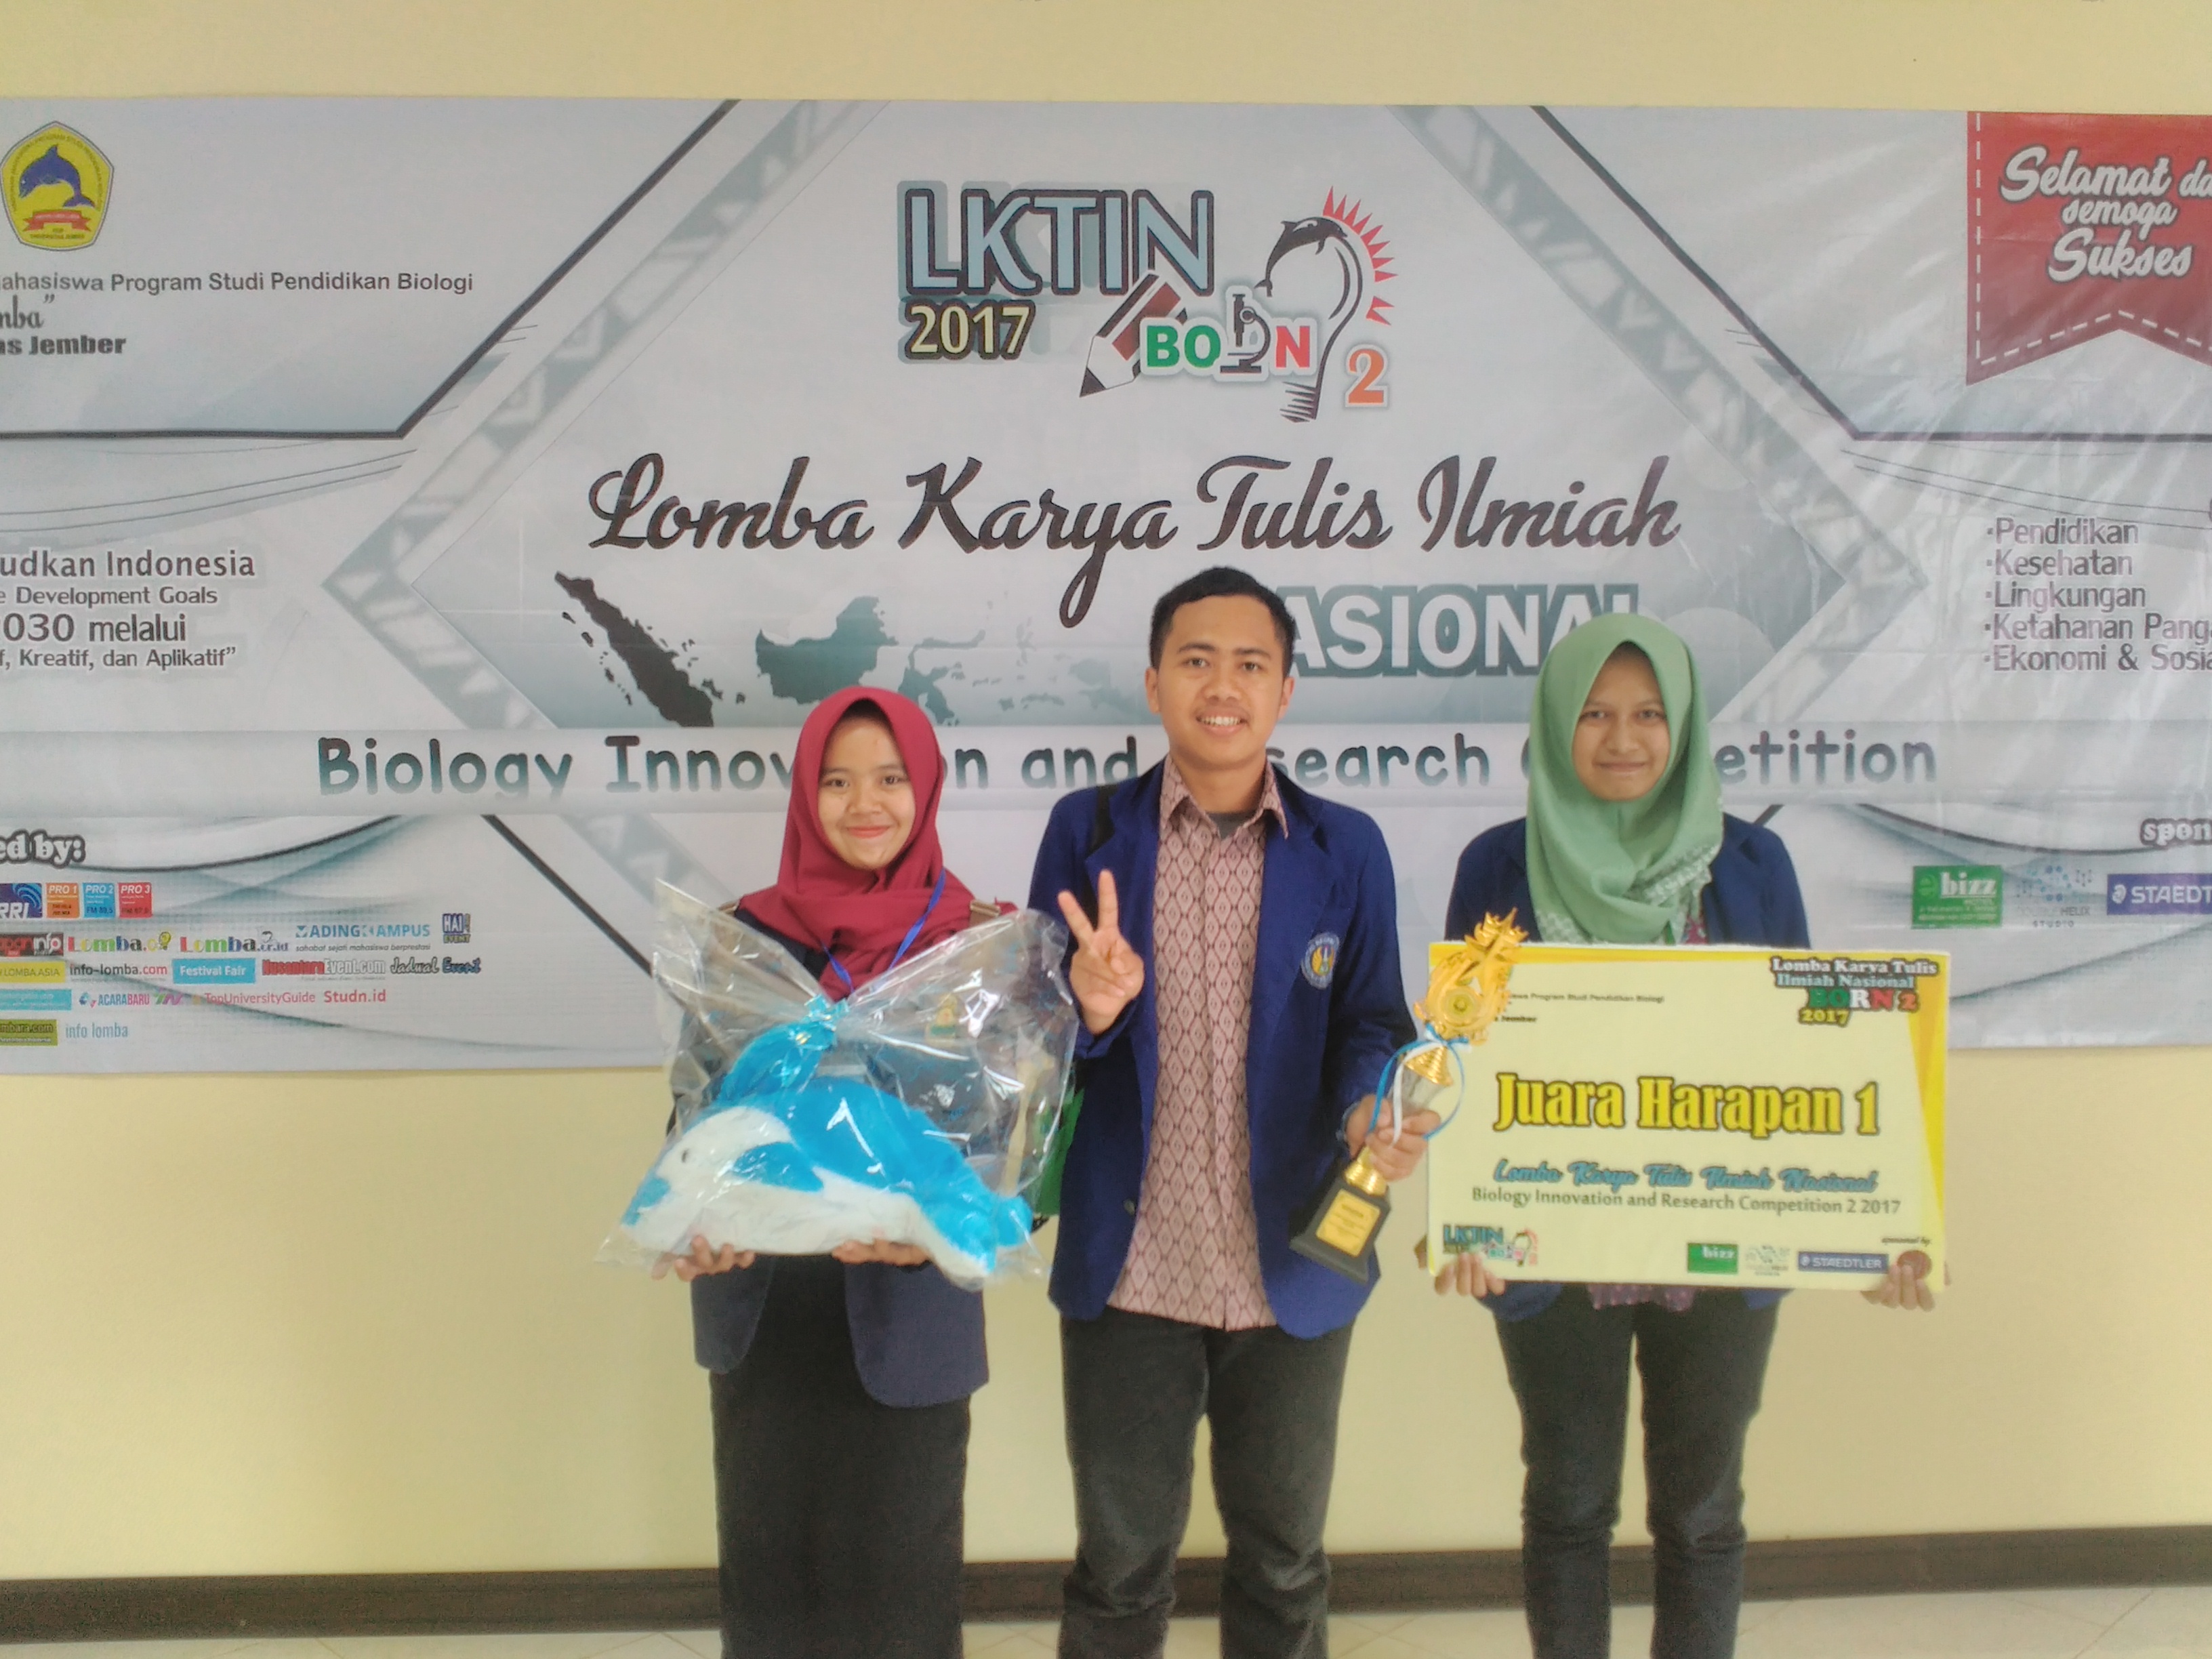 Foto LKTI Biology Innovation & Research Competition 2017